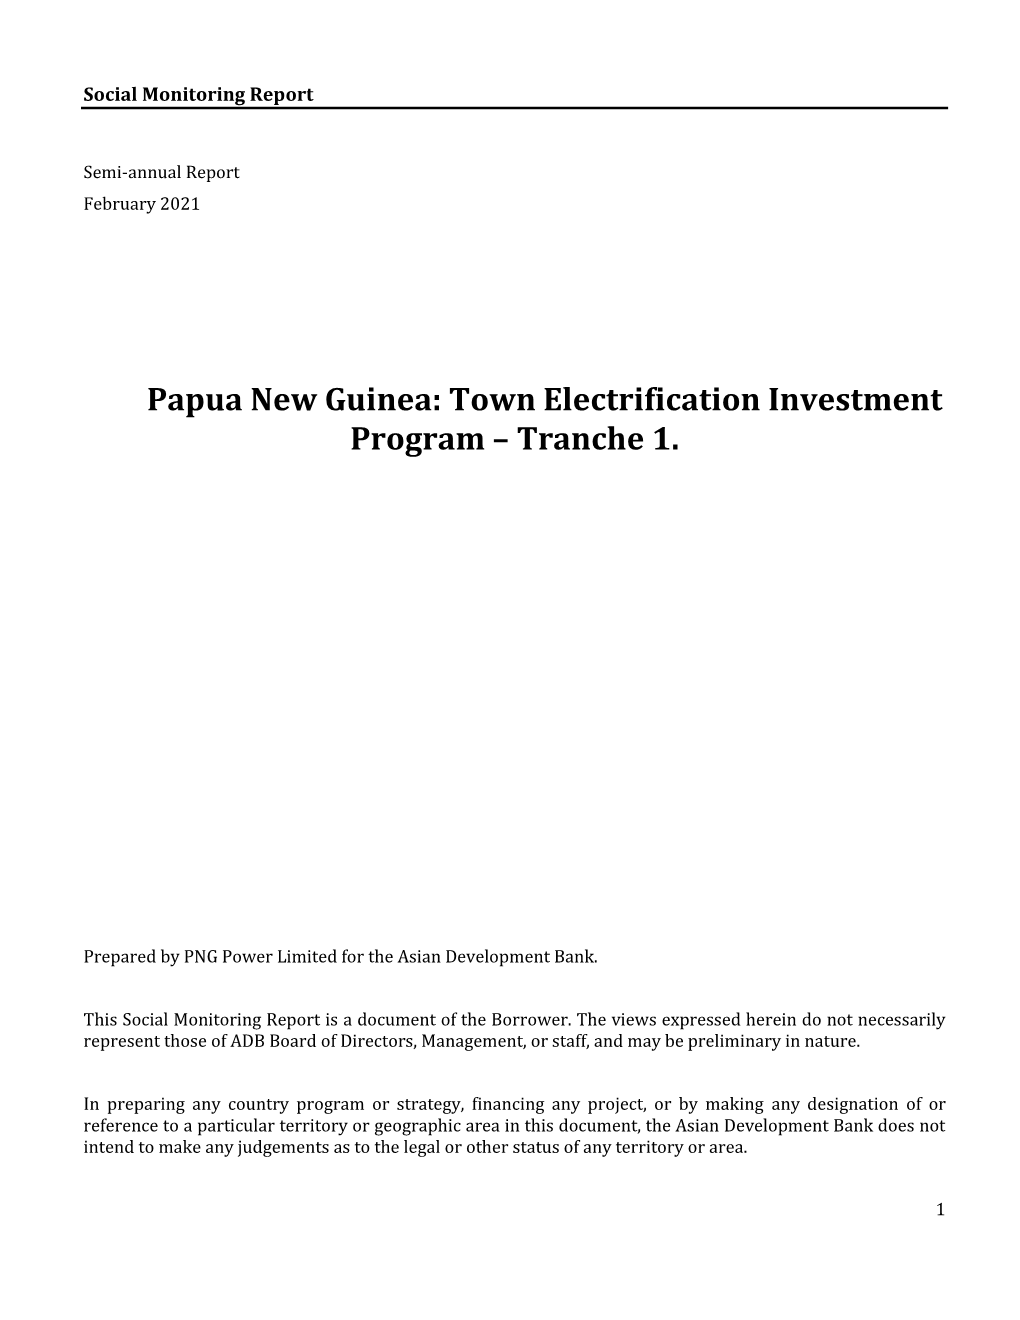 41504-023: Town Electrification Investment Program